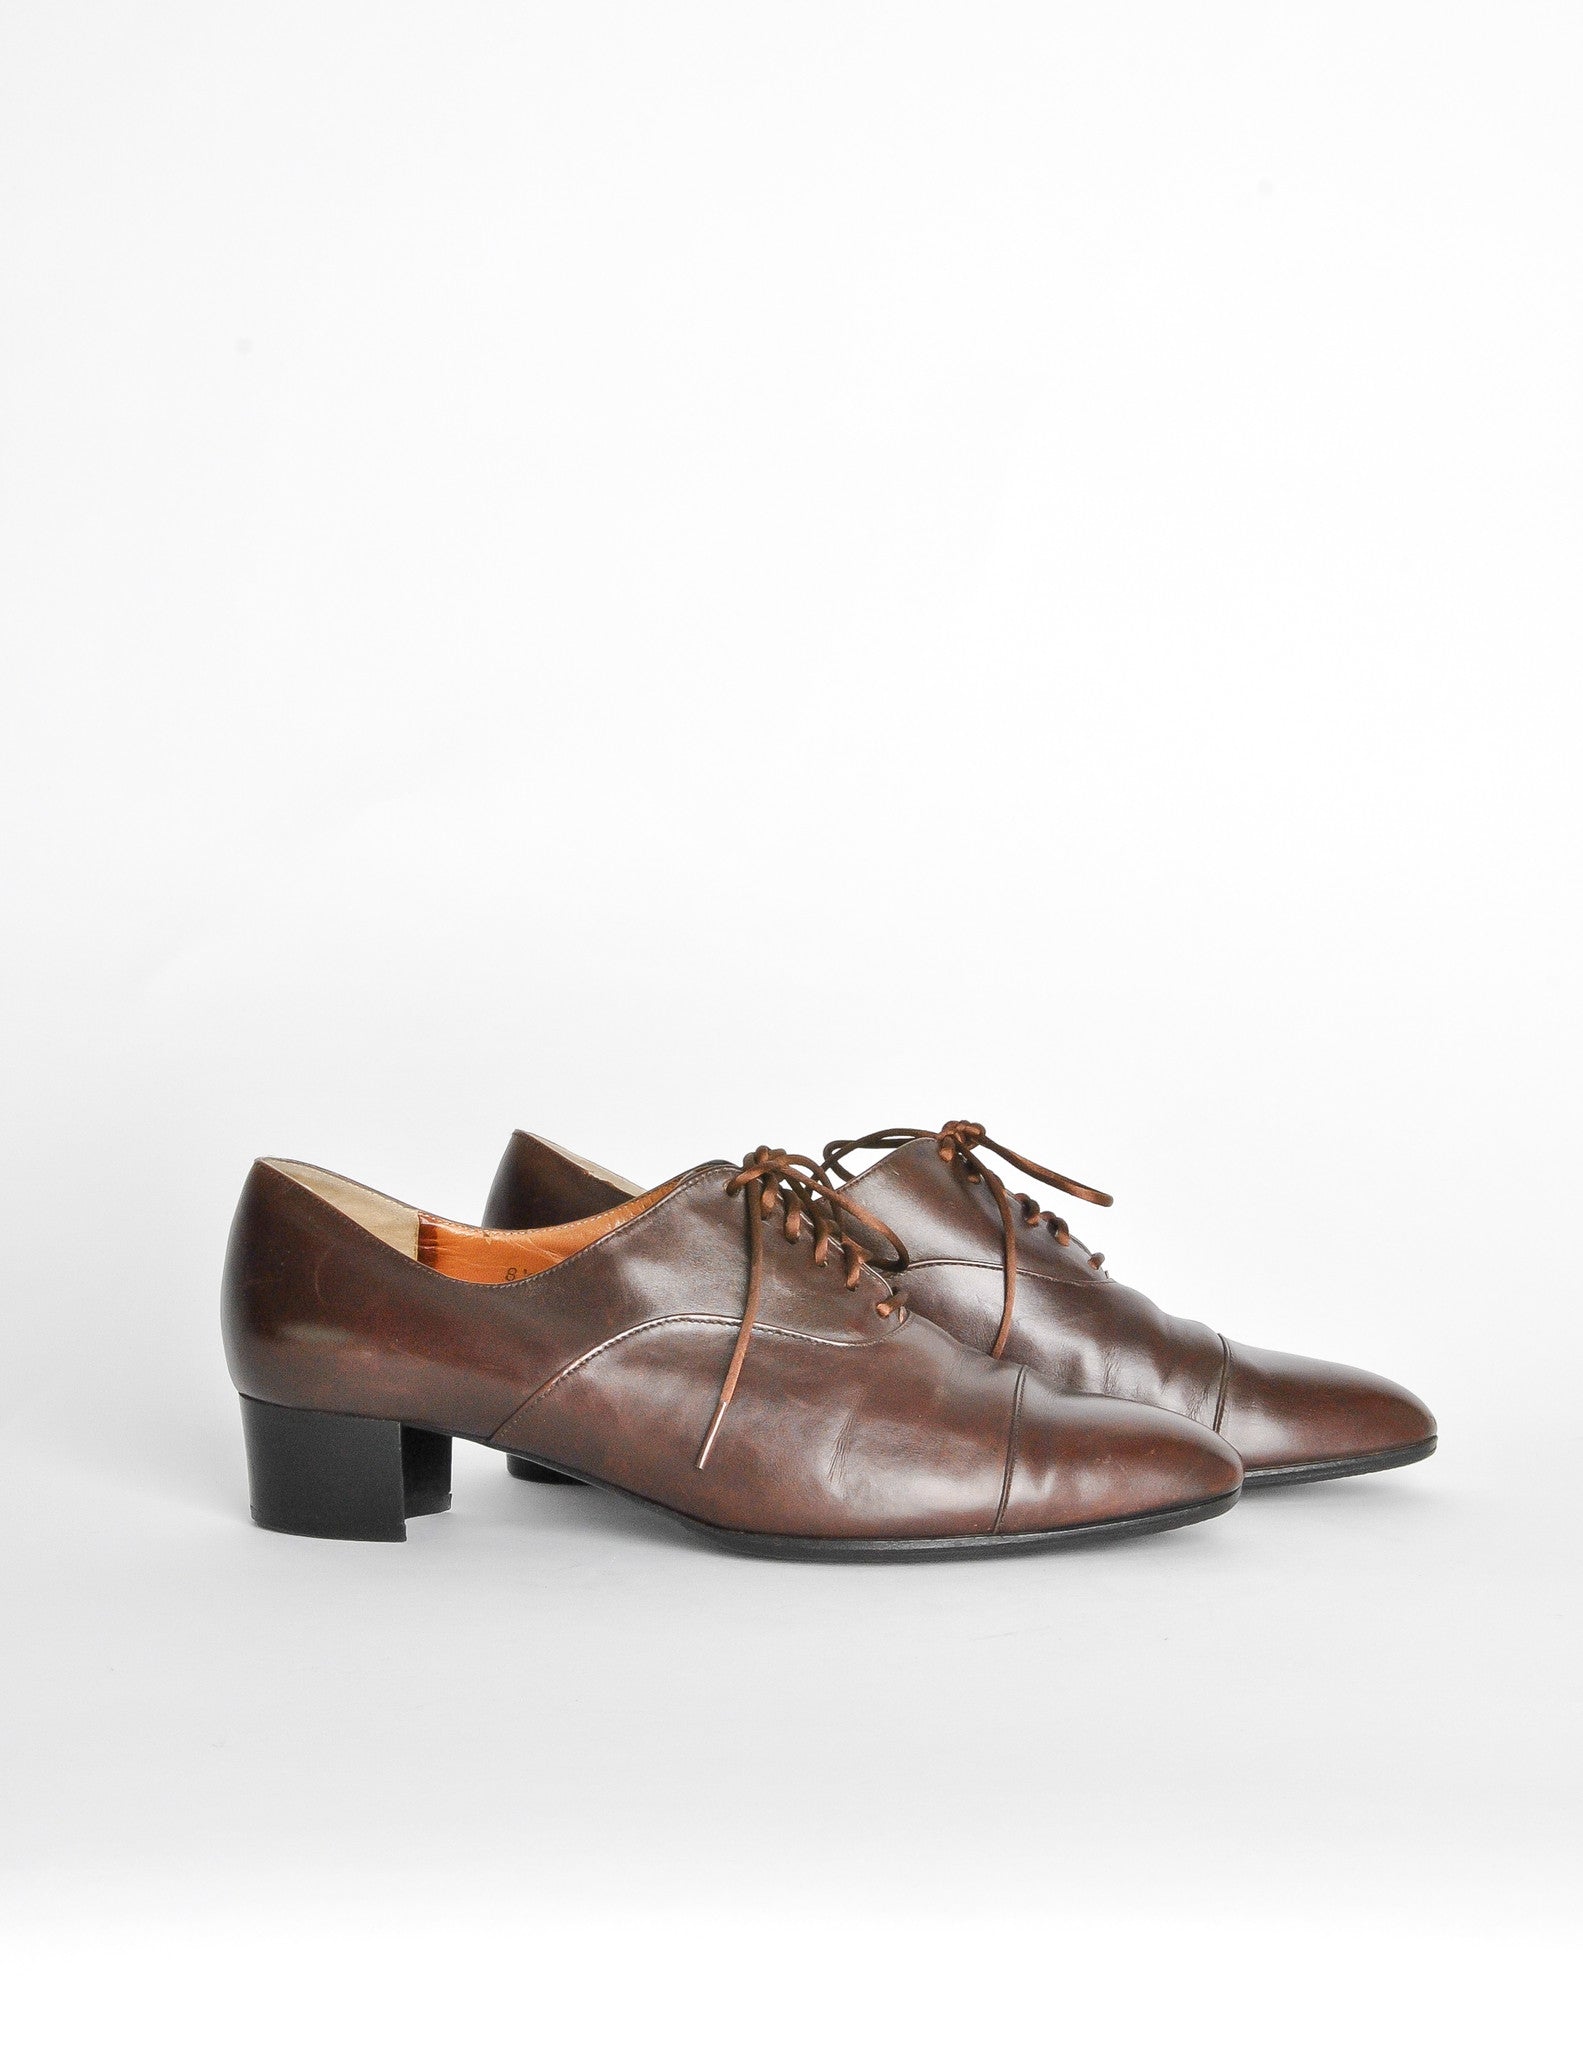 Robert Clergerie Vintage Brown Leather Heeled Oxford Shoes - from ...